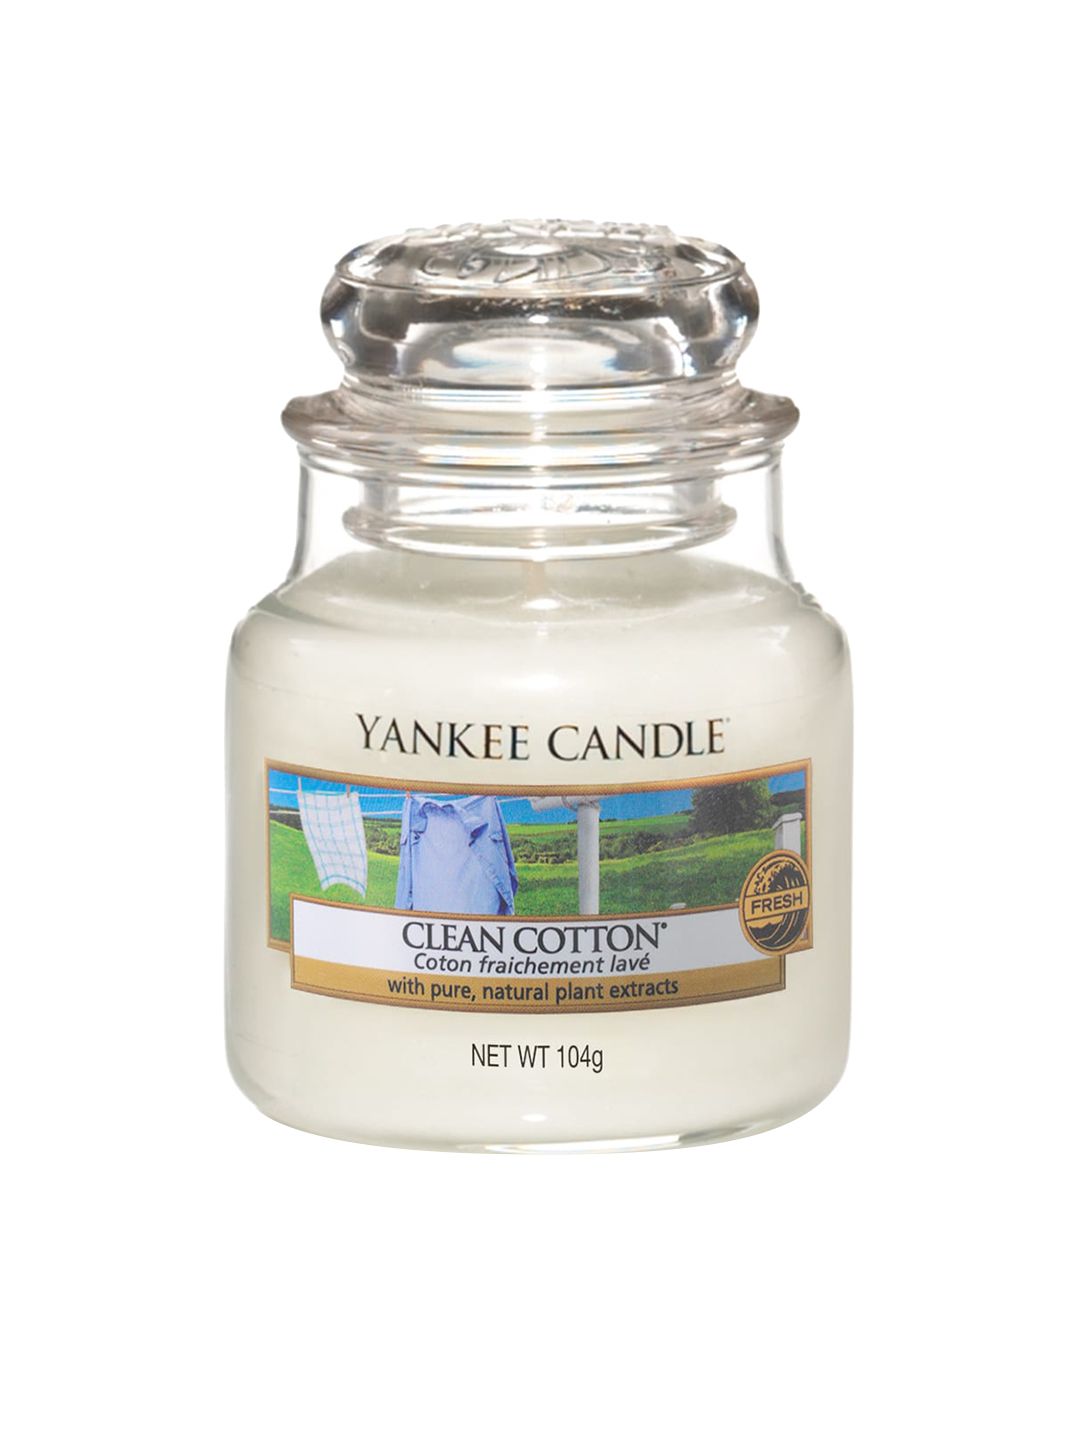 YANKEE CANDLE White Clean Cotton Scented Small Jar Candle Price in India